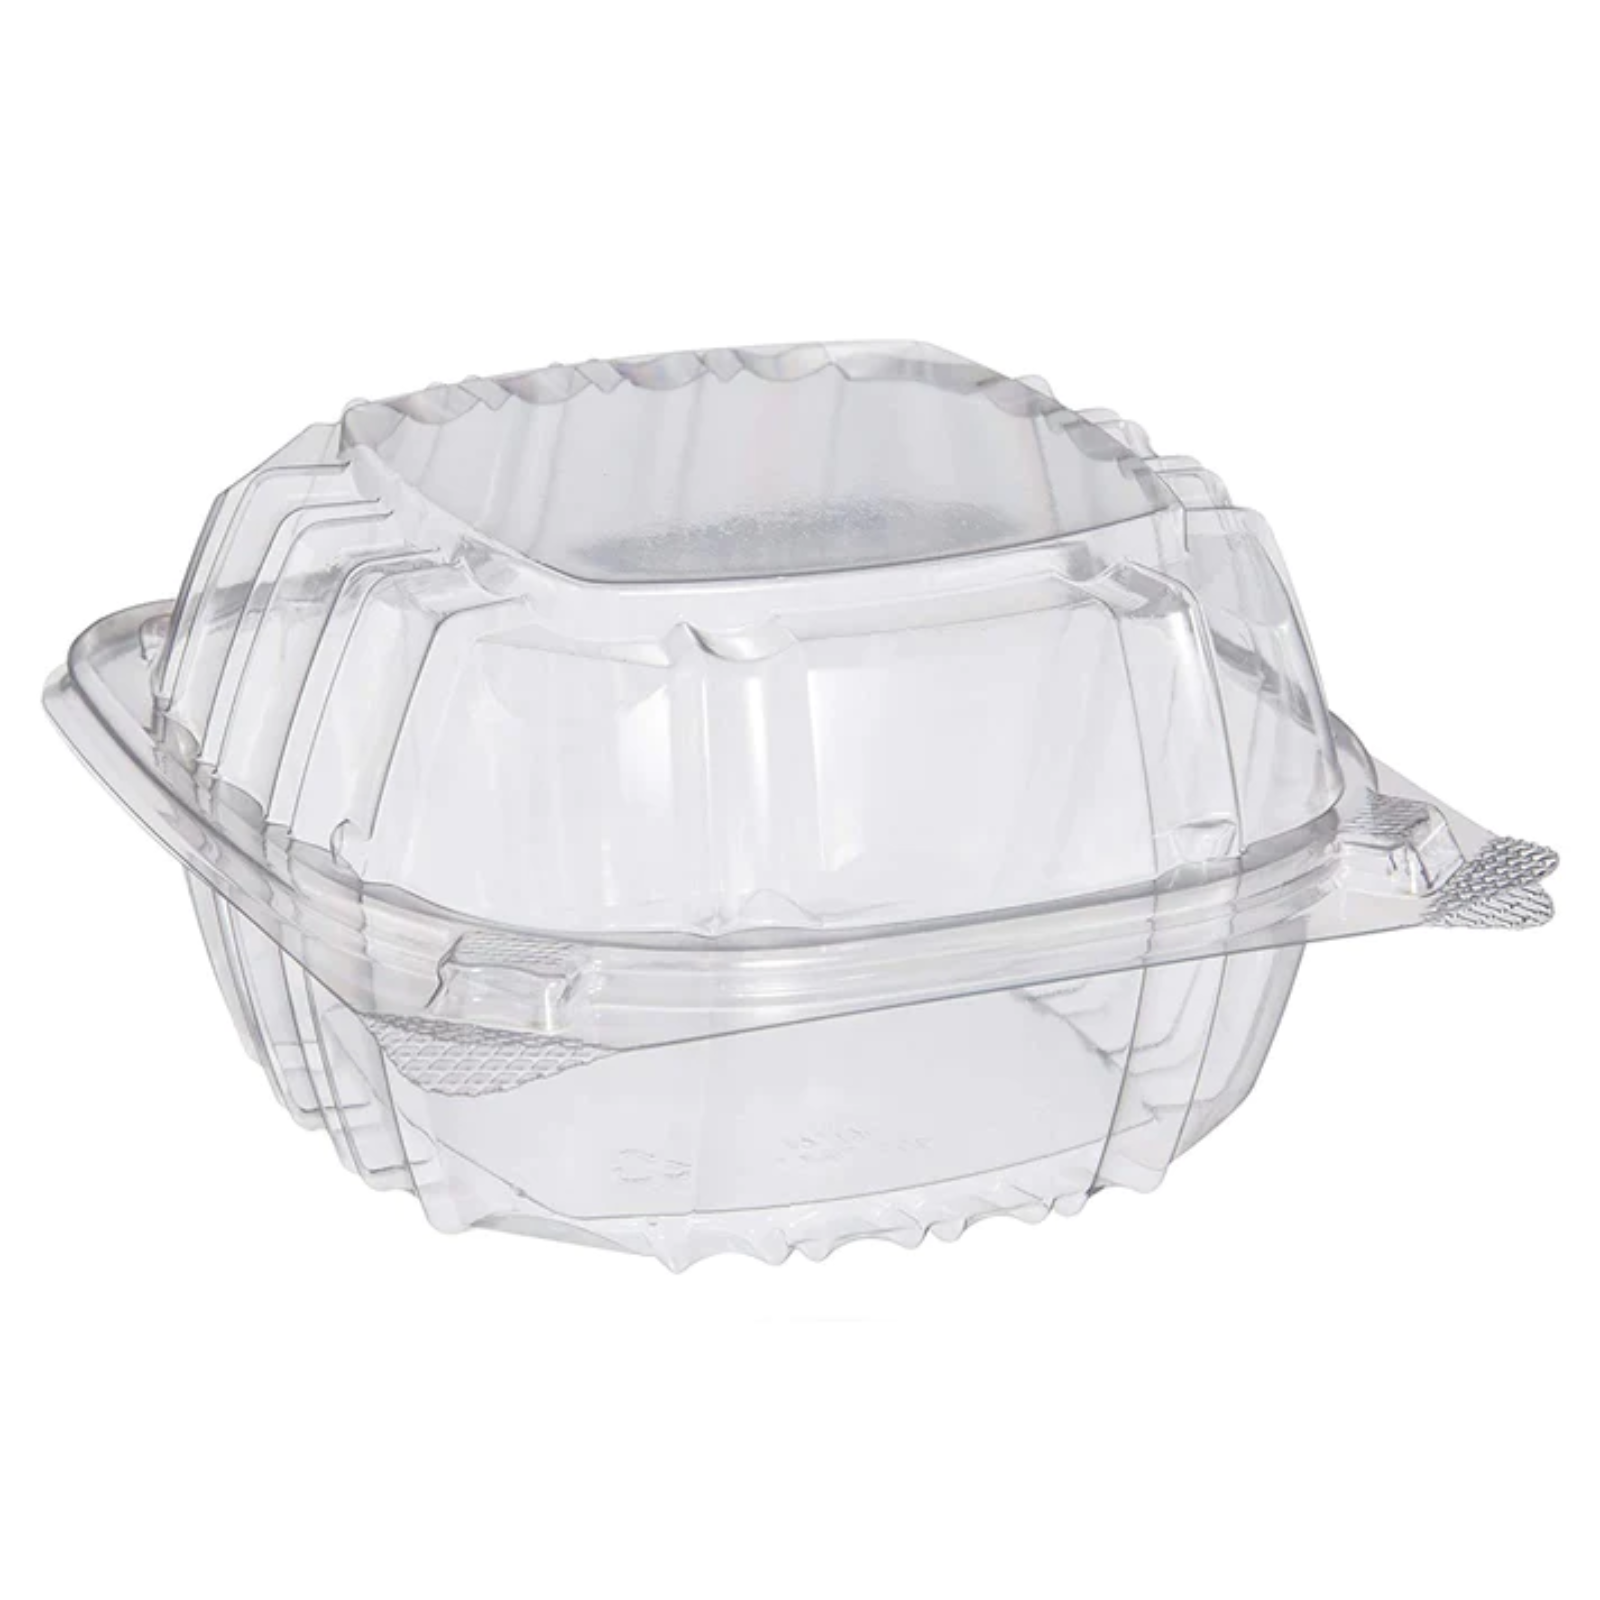 DART Model # C57PST1| ClearSeal Hinged Lid Plastic Container Salad Containers Dart   